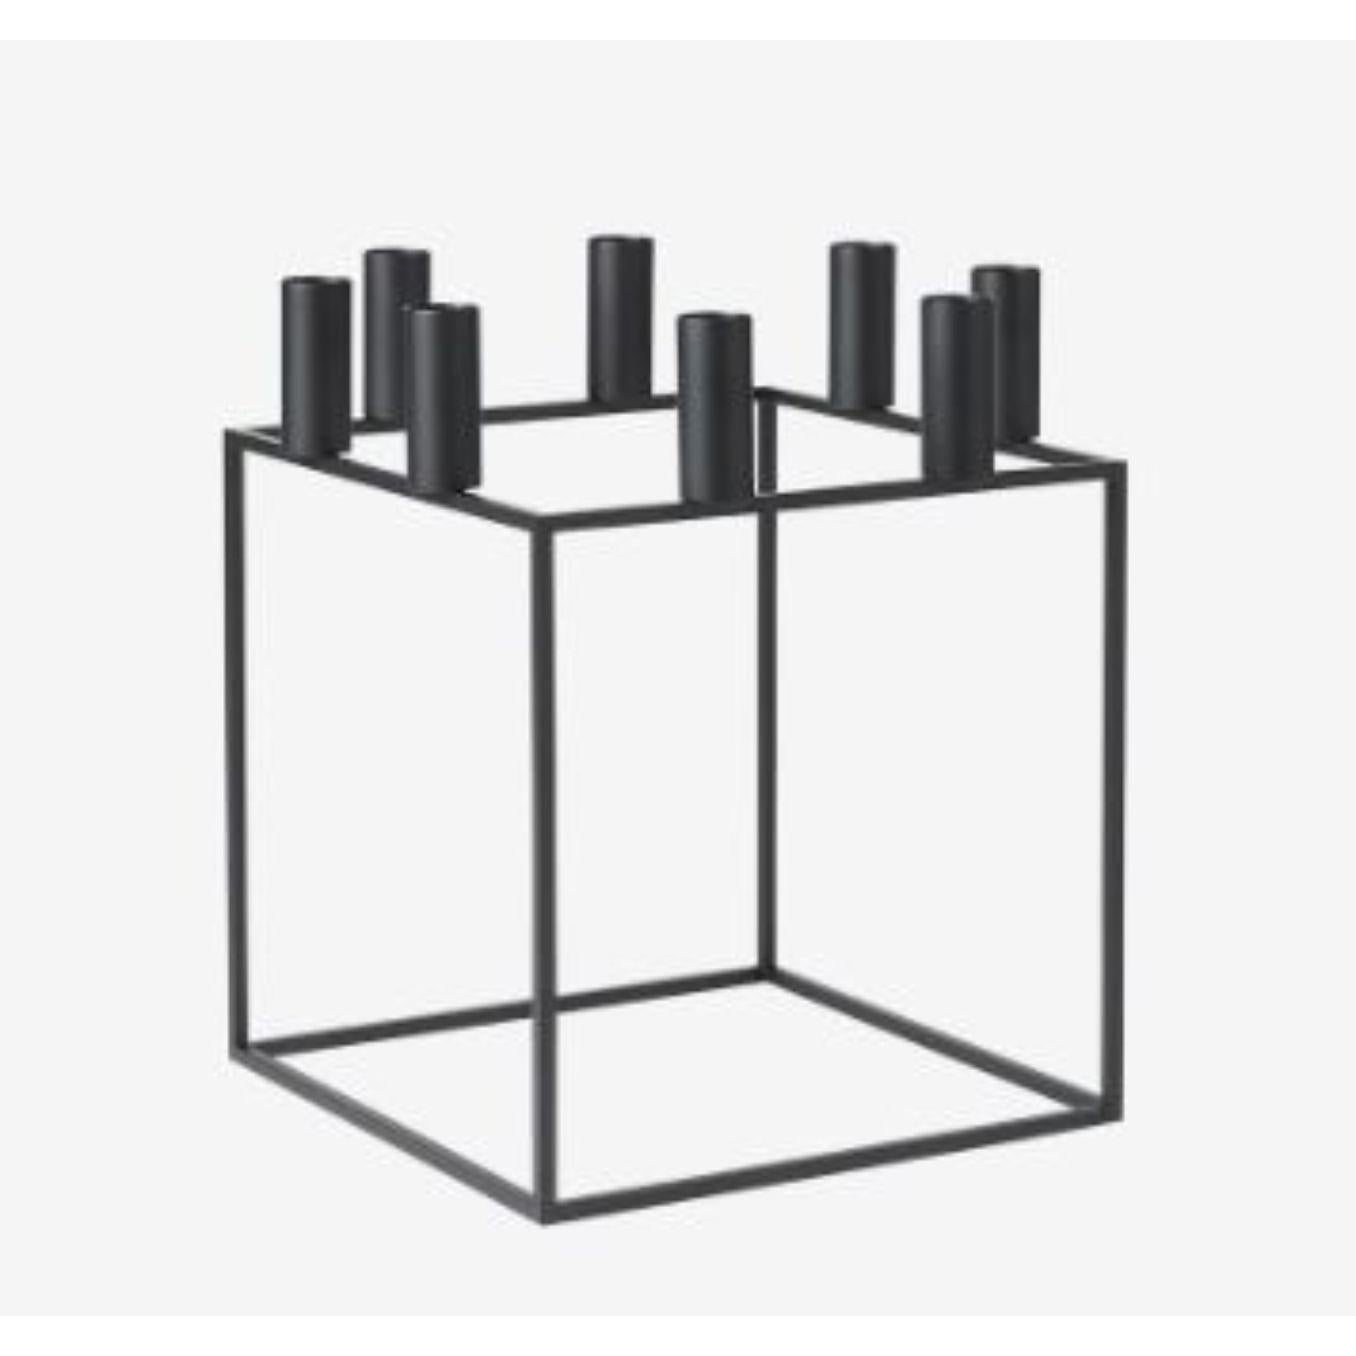 Black Kubus 8 candle holder by Lassen
Dimensions: D 23 x W 23 x H 29 cm 
Materials: Metal 
Also available in different dimensions. 
Weight: 1.50 Kg

With a sharp sense of contemporary Functionalist style, Mogens Lassen designed the iconic